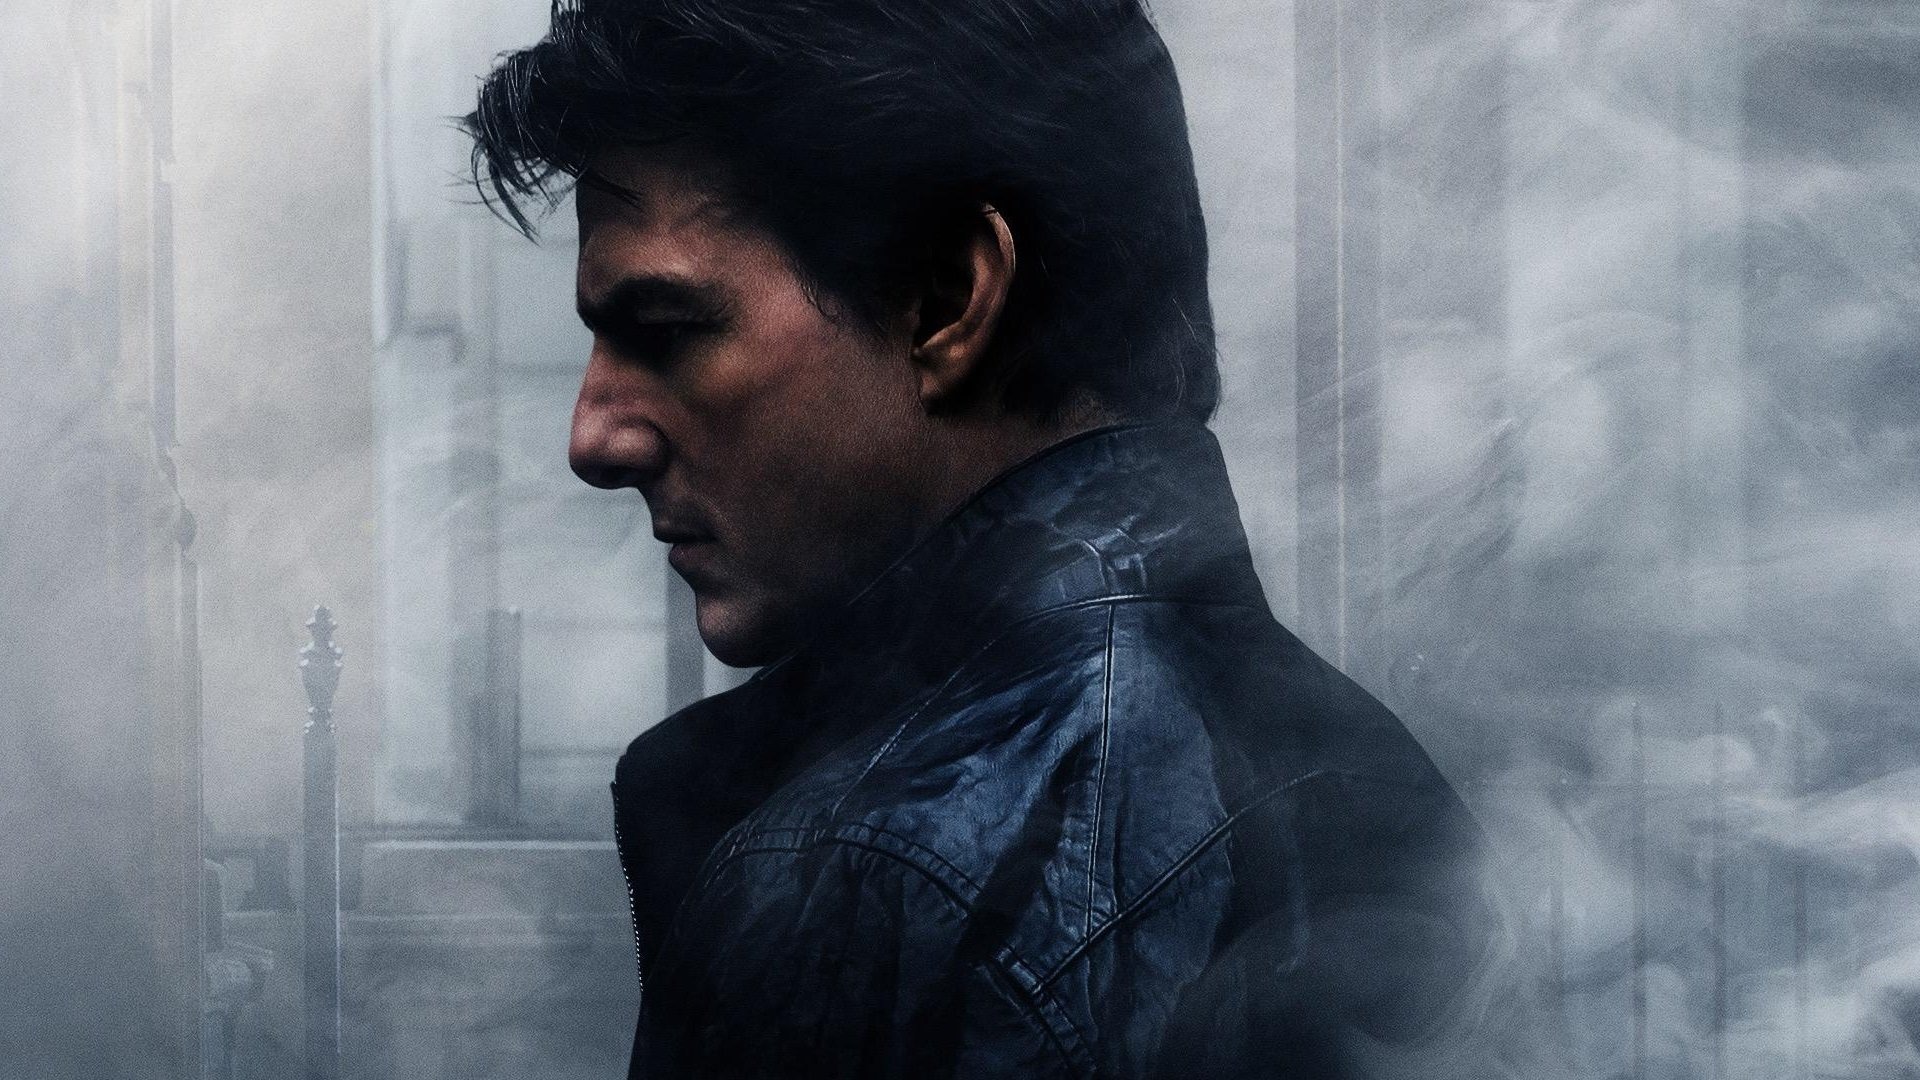 Mission Impossible: Rogue Nation, HD movie wallpapers #12 - 1920x1080